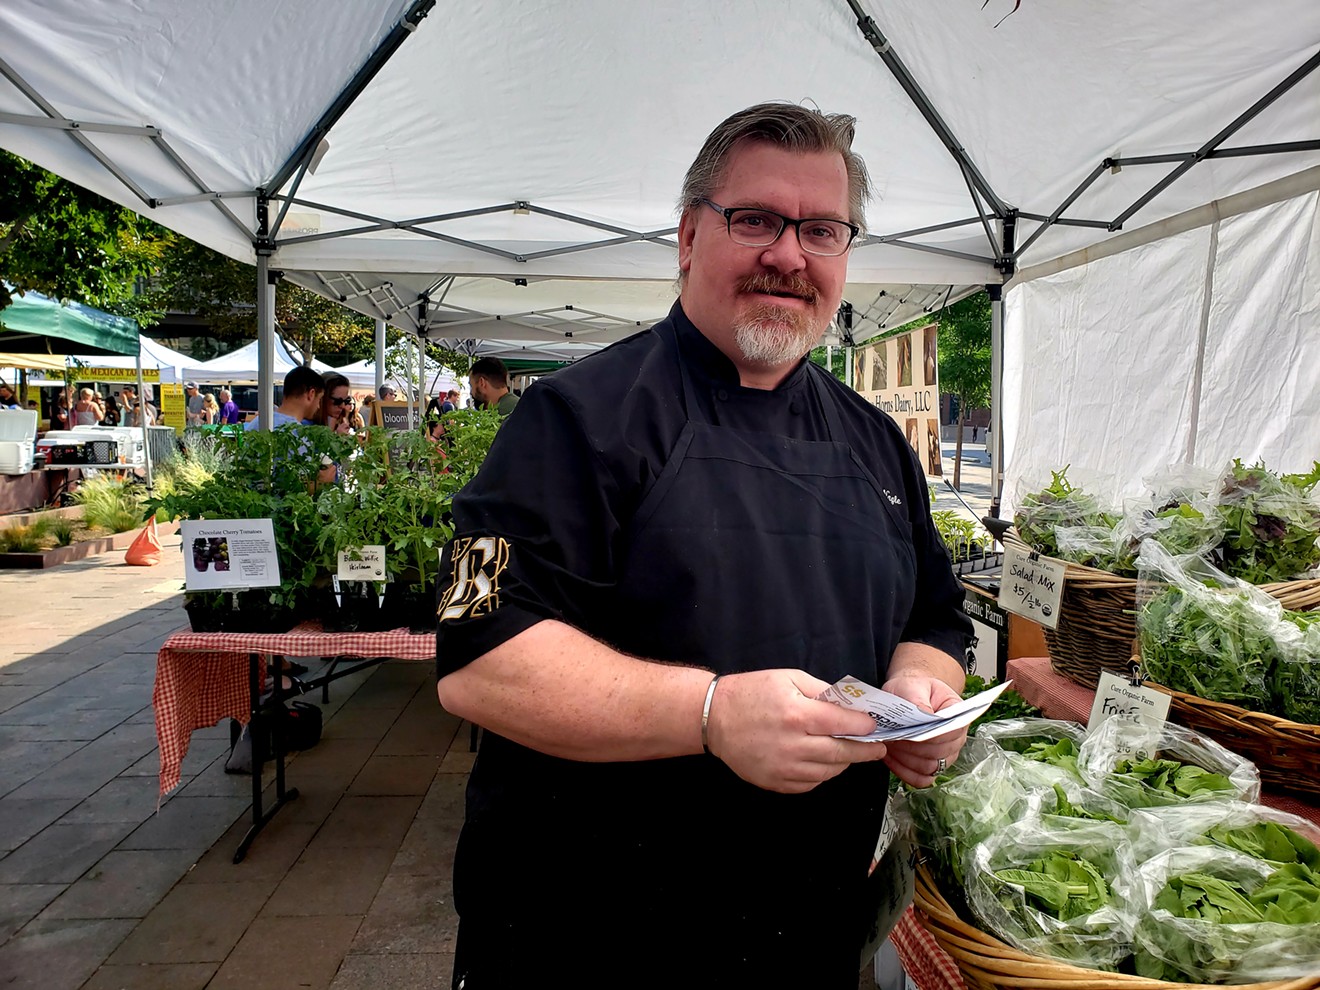 Chef DJ Nagle of Briar Common was the featured chef at the Union Station Farmers' Market demo on Saturday, June 16.